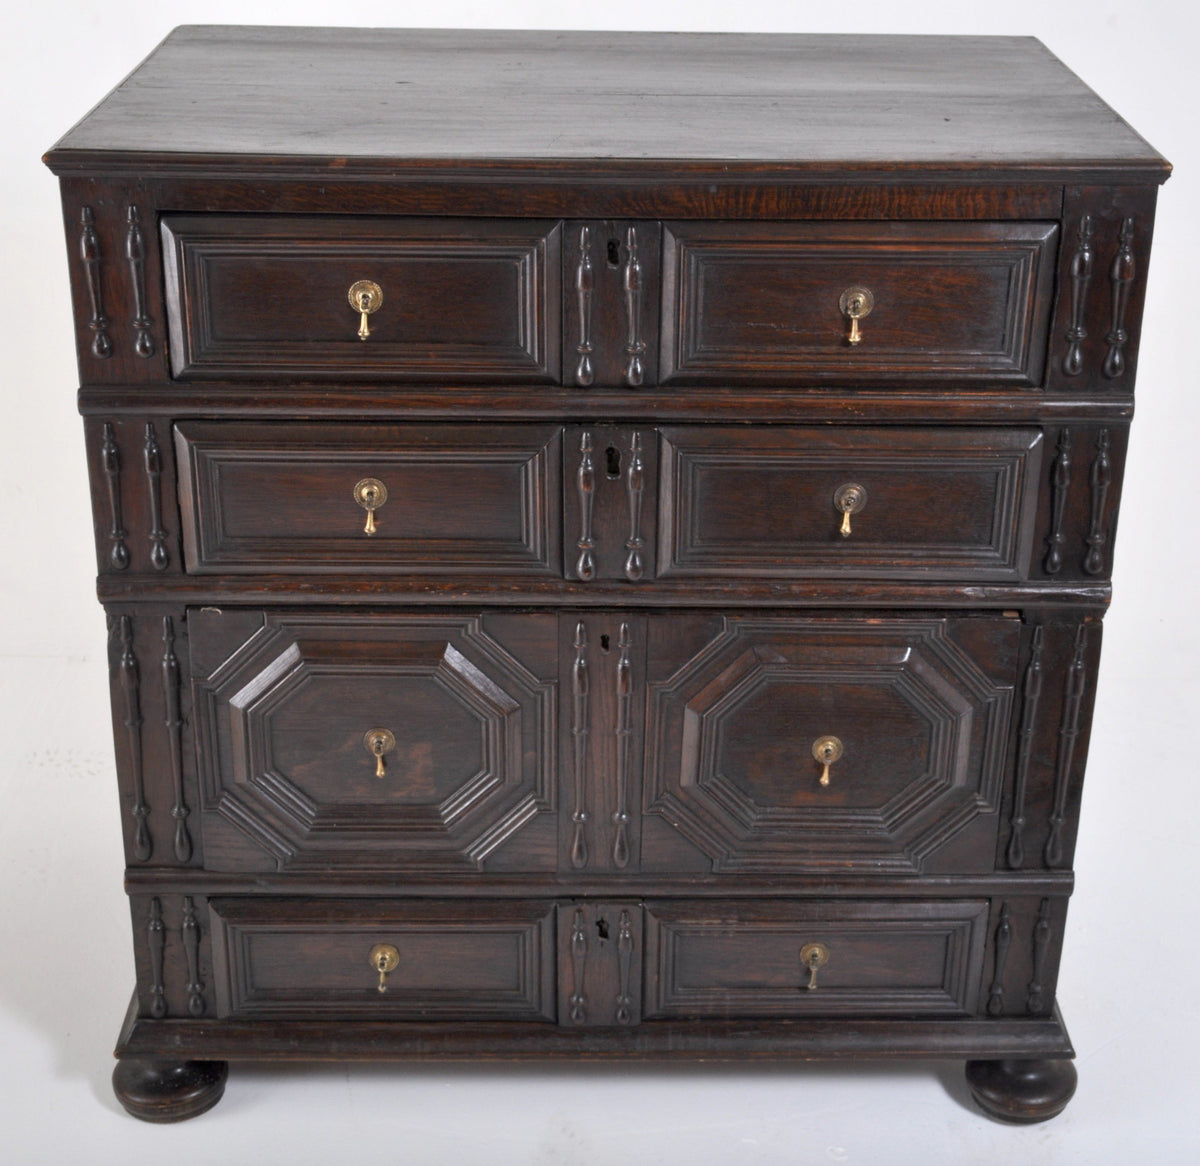 Antique English William & Mary Chest of Drawers, Circa 1700